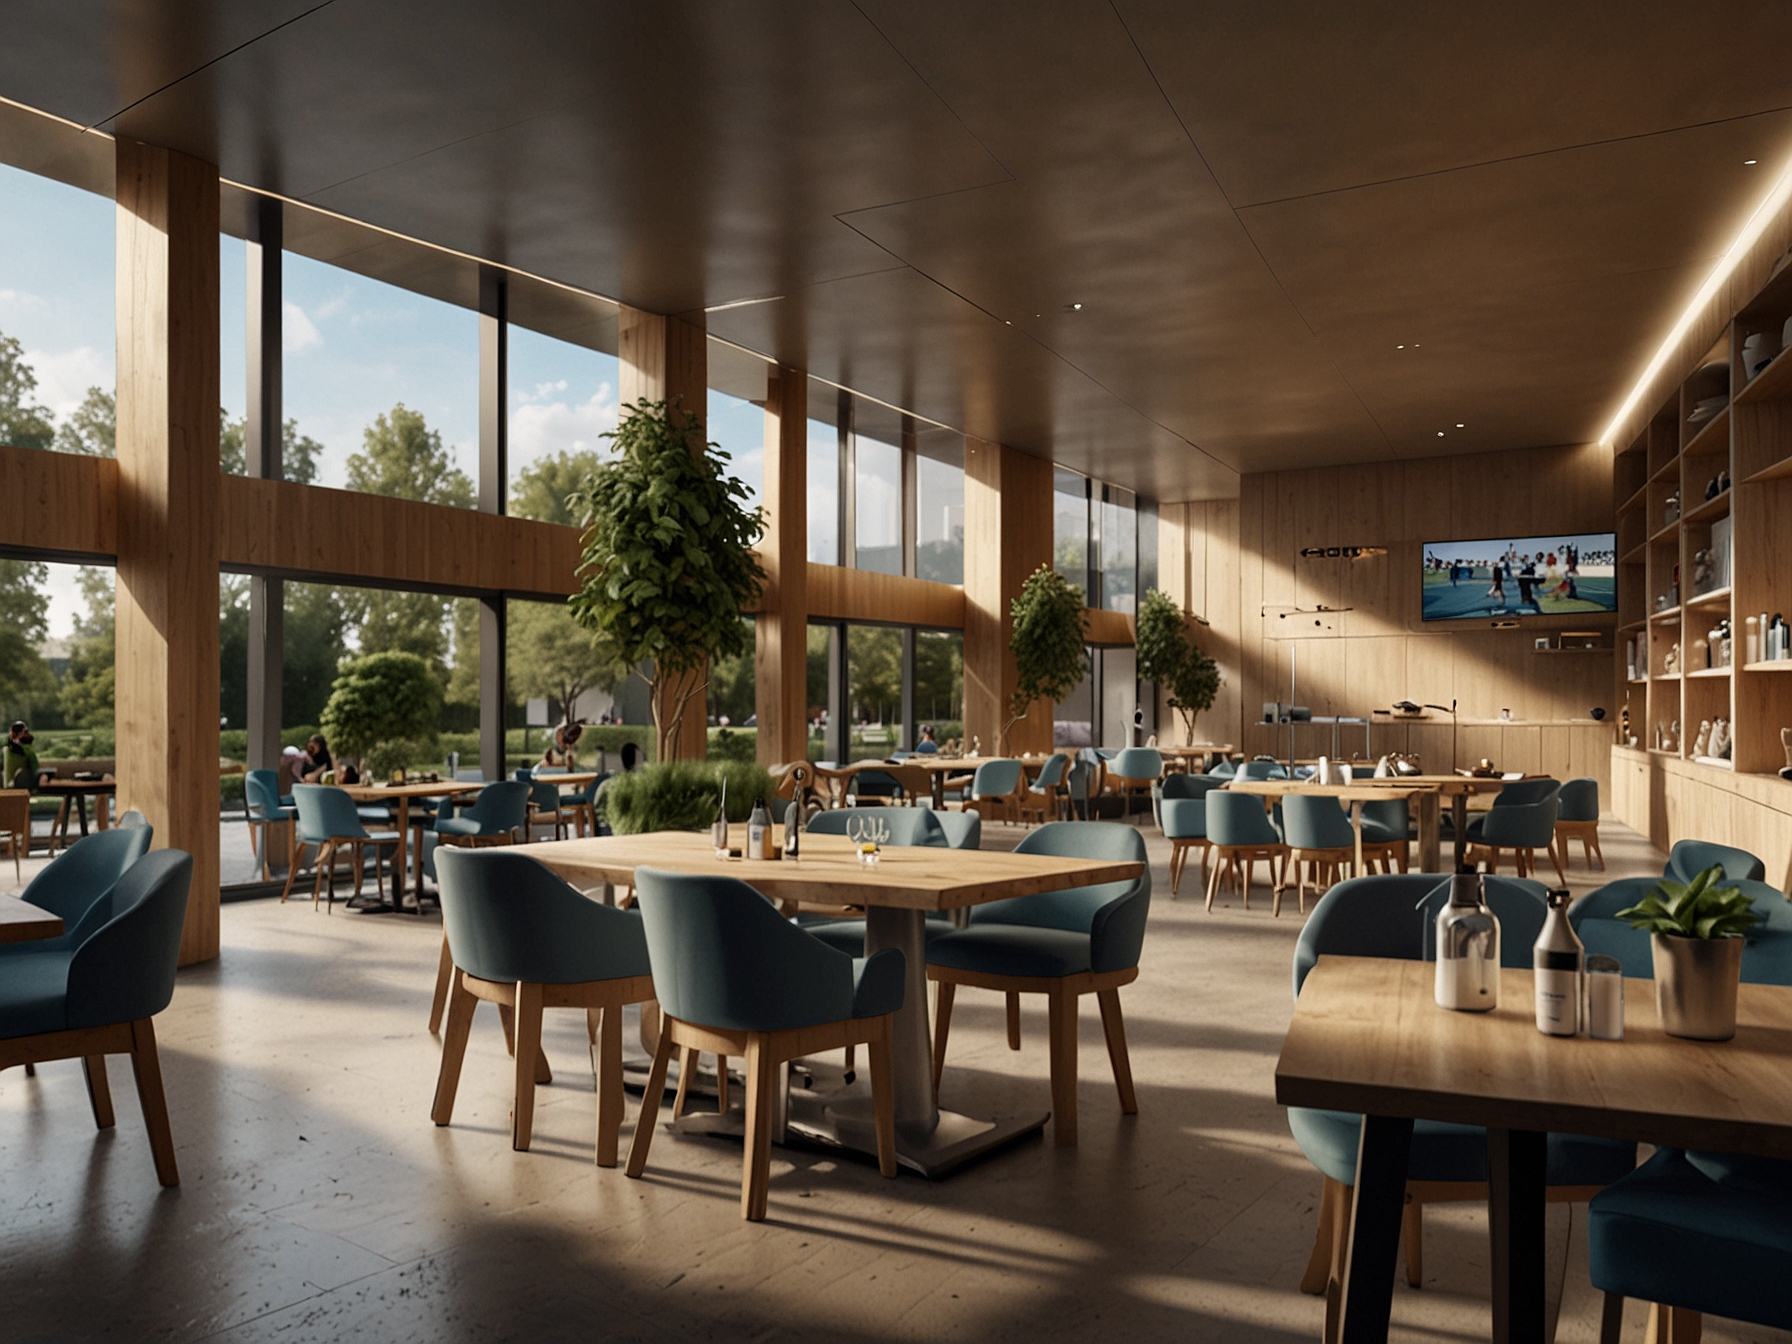 An artist's rendering of Accor's Athlete's Village for Paris 2024, showcasing nutrition-focused dining, physical therapy rooms, and recreational areas designed for athlete rejuvenation.